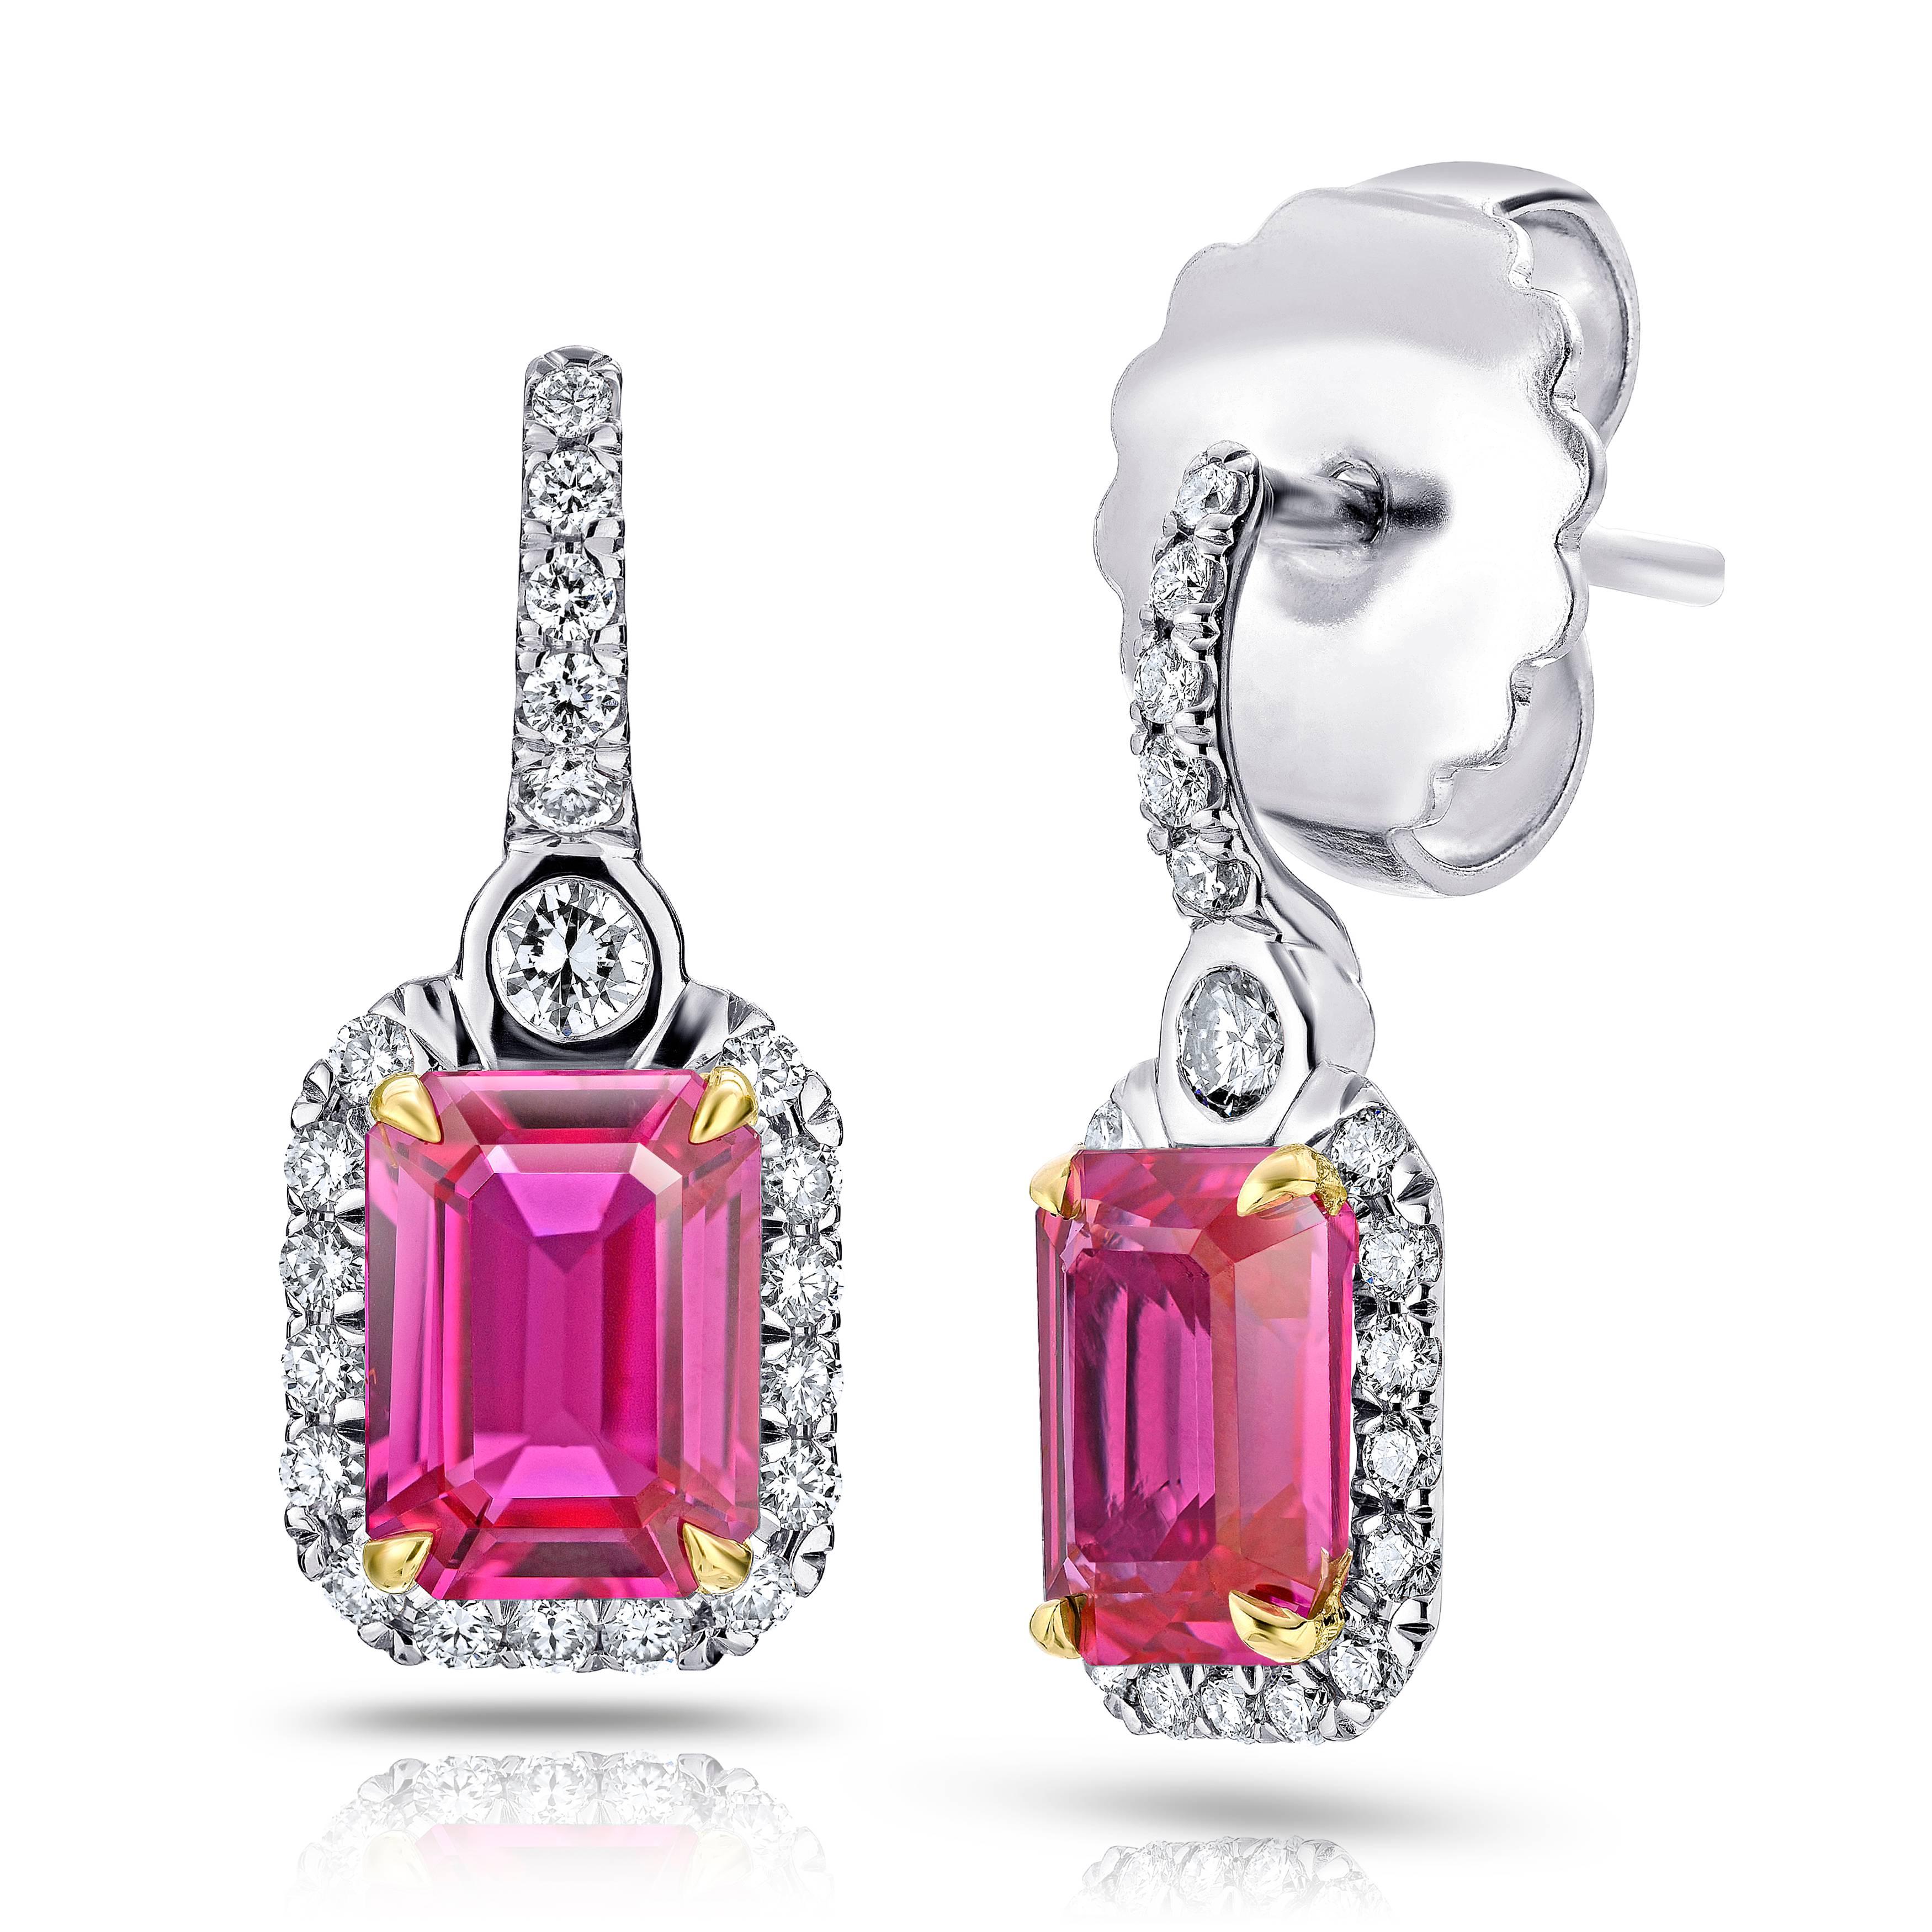 2.76 carat emerald cut pink mozambique sapphires (no heat) and 42 round diamonds .39 carats halo push back drop earrings set in platinum and 18k yellow gold
